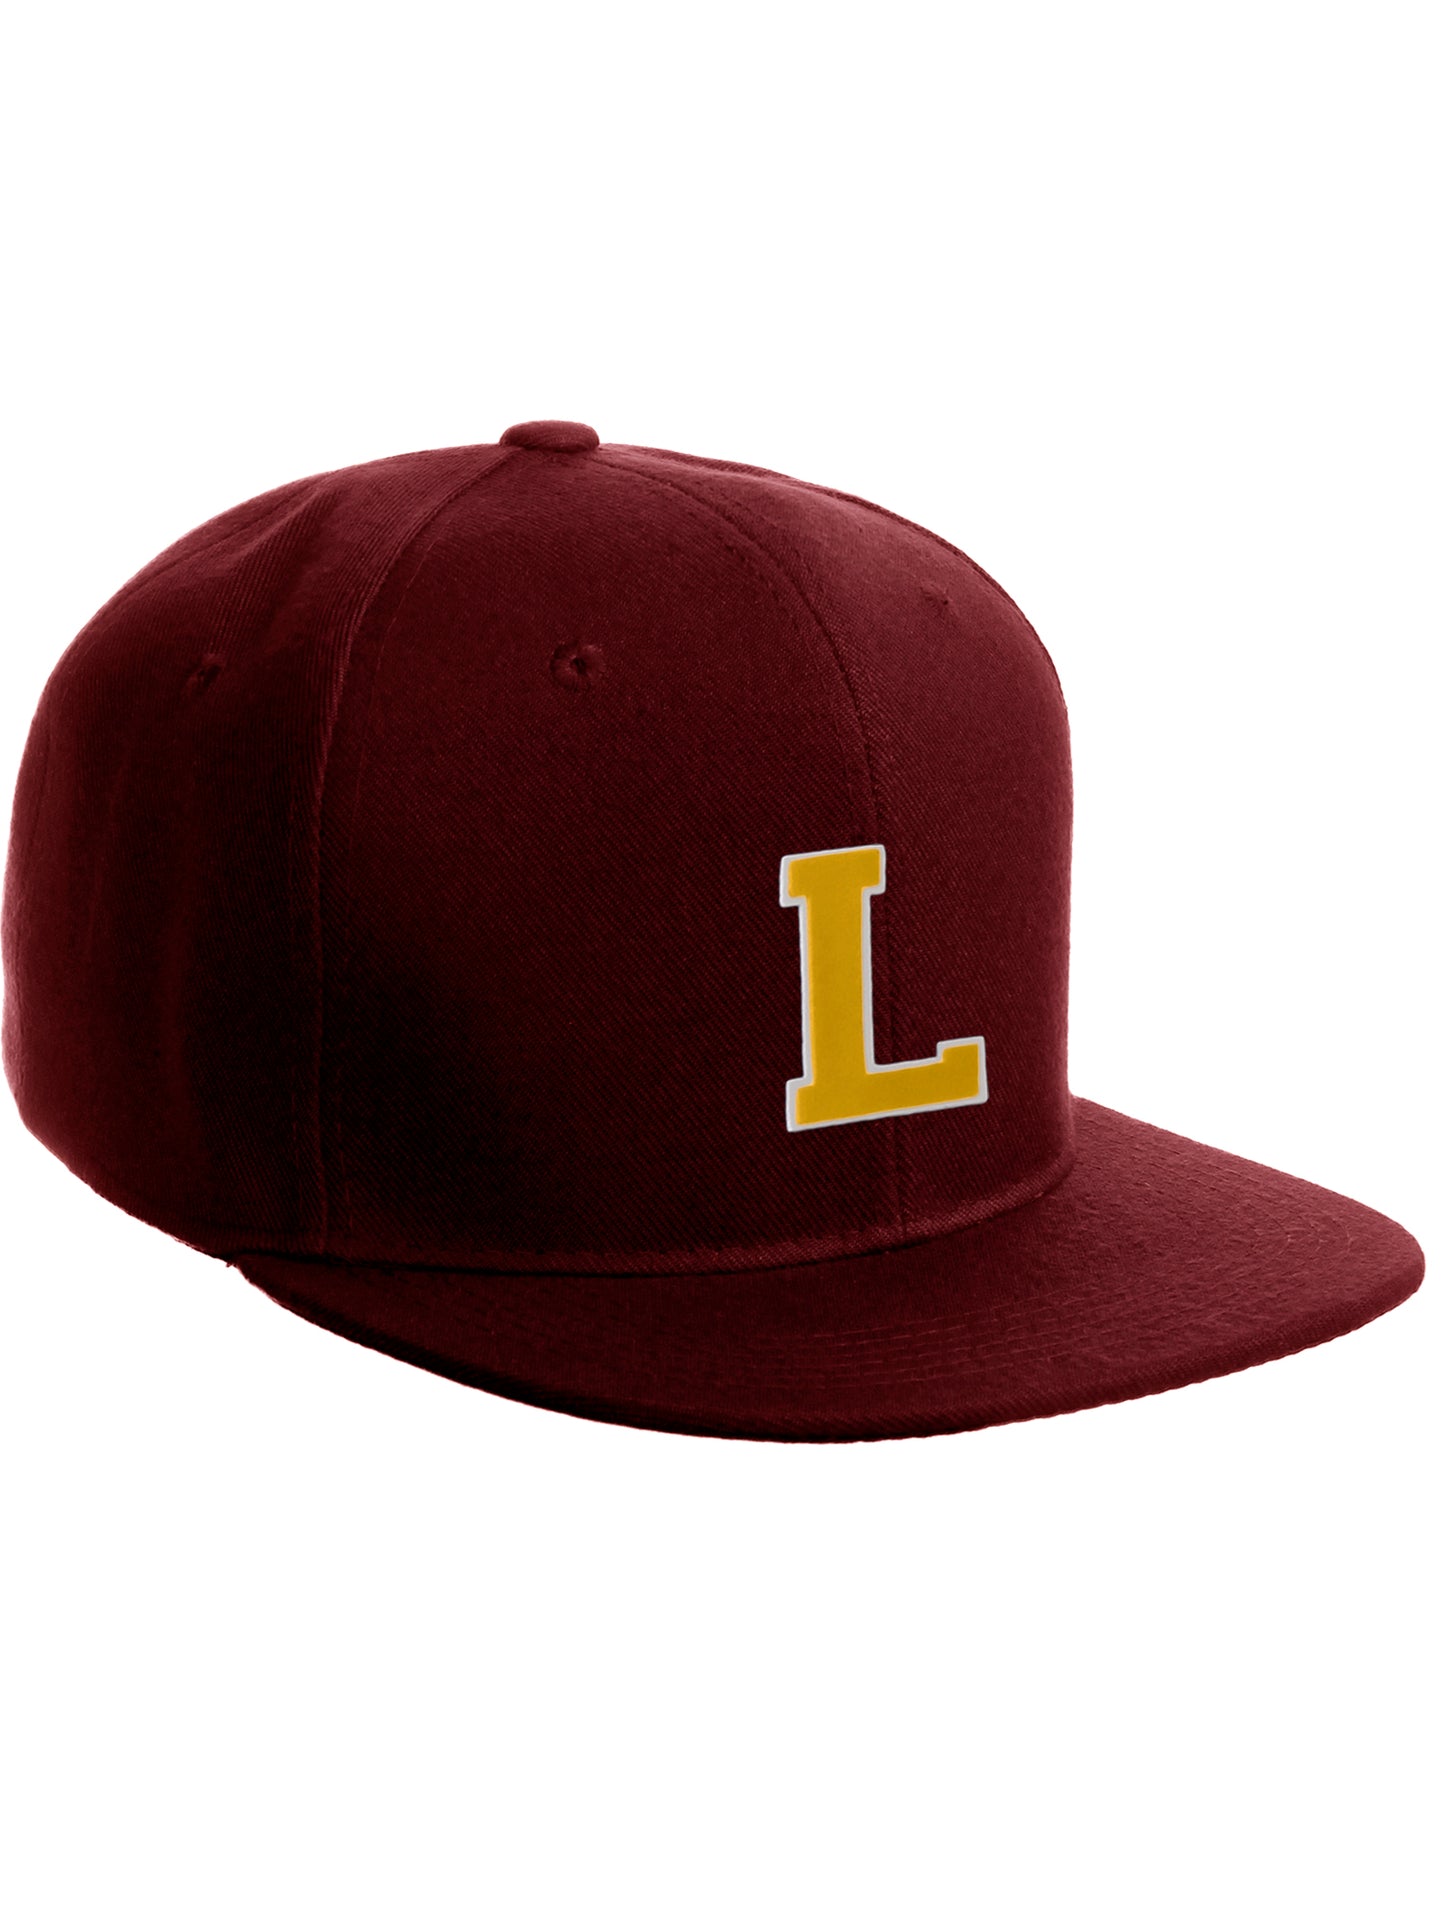 Classic Snapback Hat Custom A to Z Initial Letters, Burgundy Cap White Gold